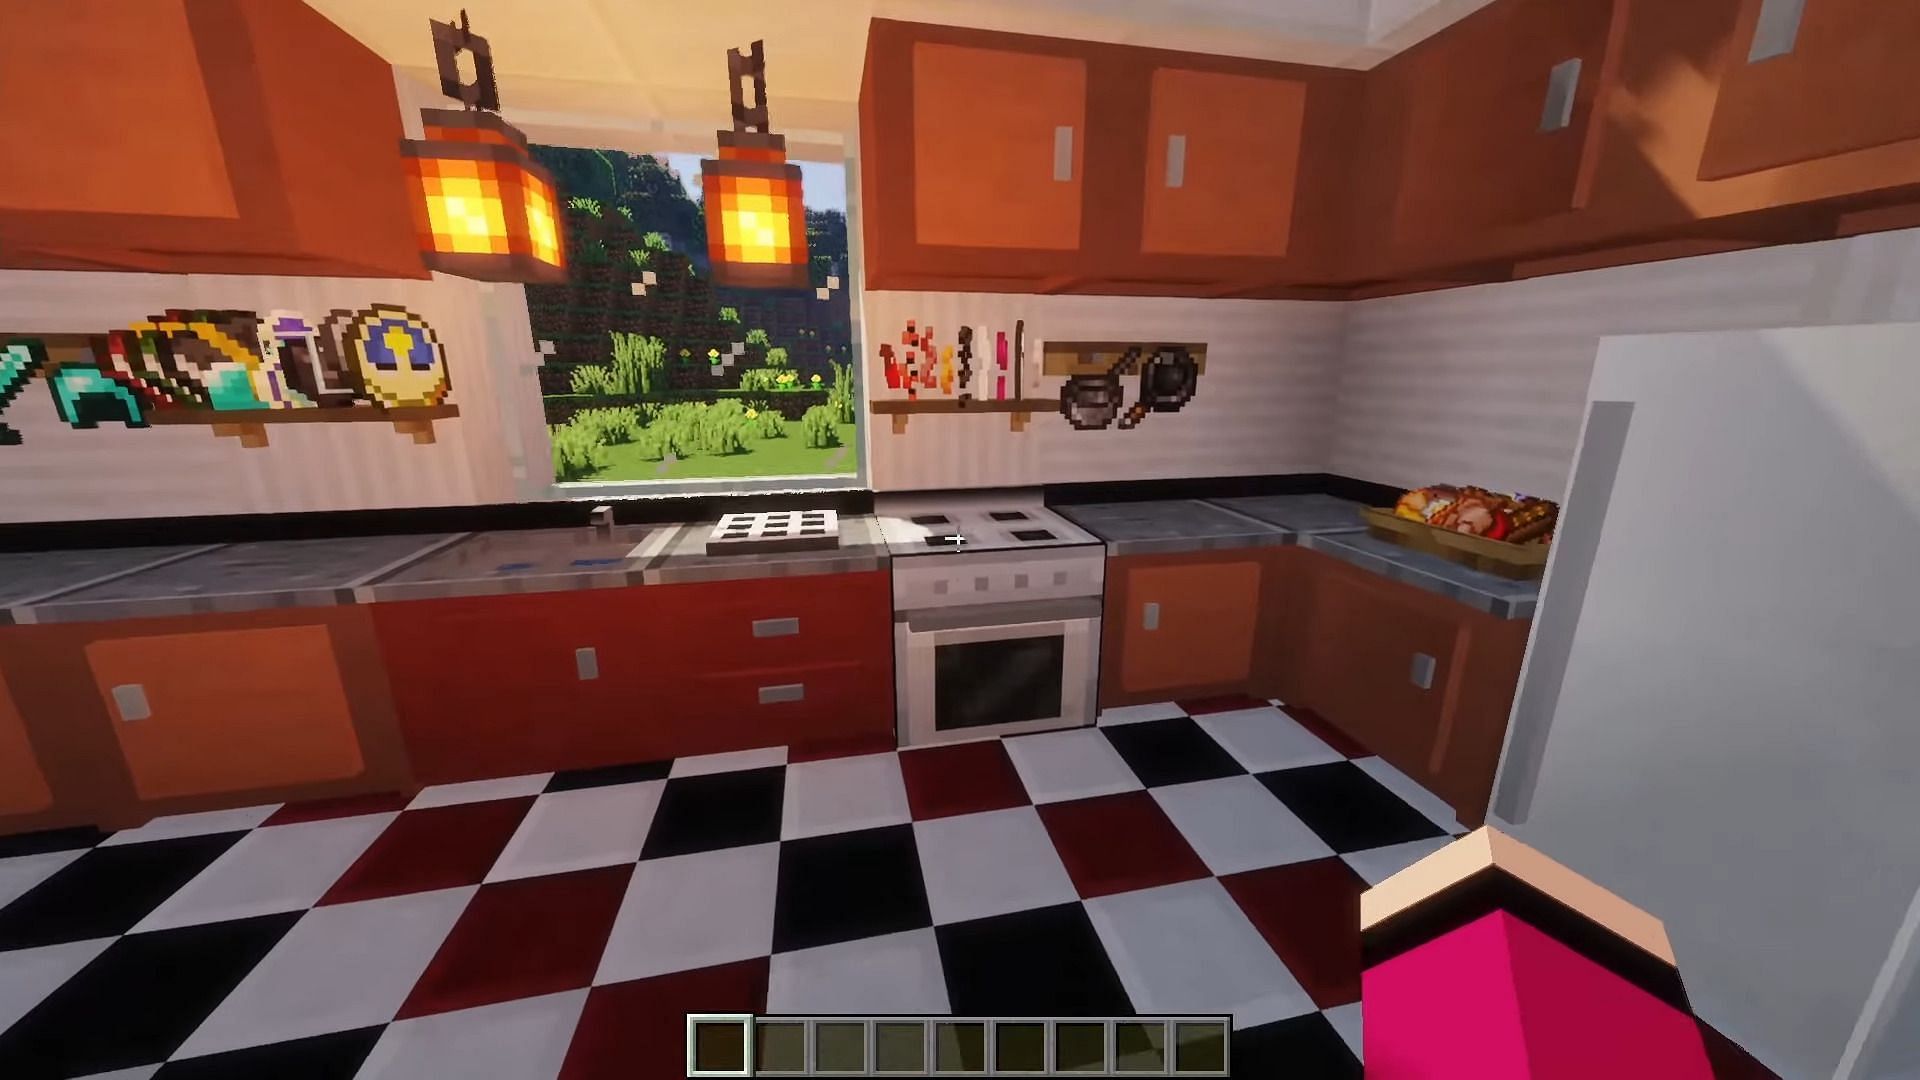 This Minecraft kitchen mod is incredibly detailed and fully functional. (Image via Crimson Gaming/YouTube)